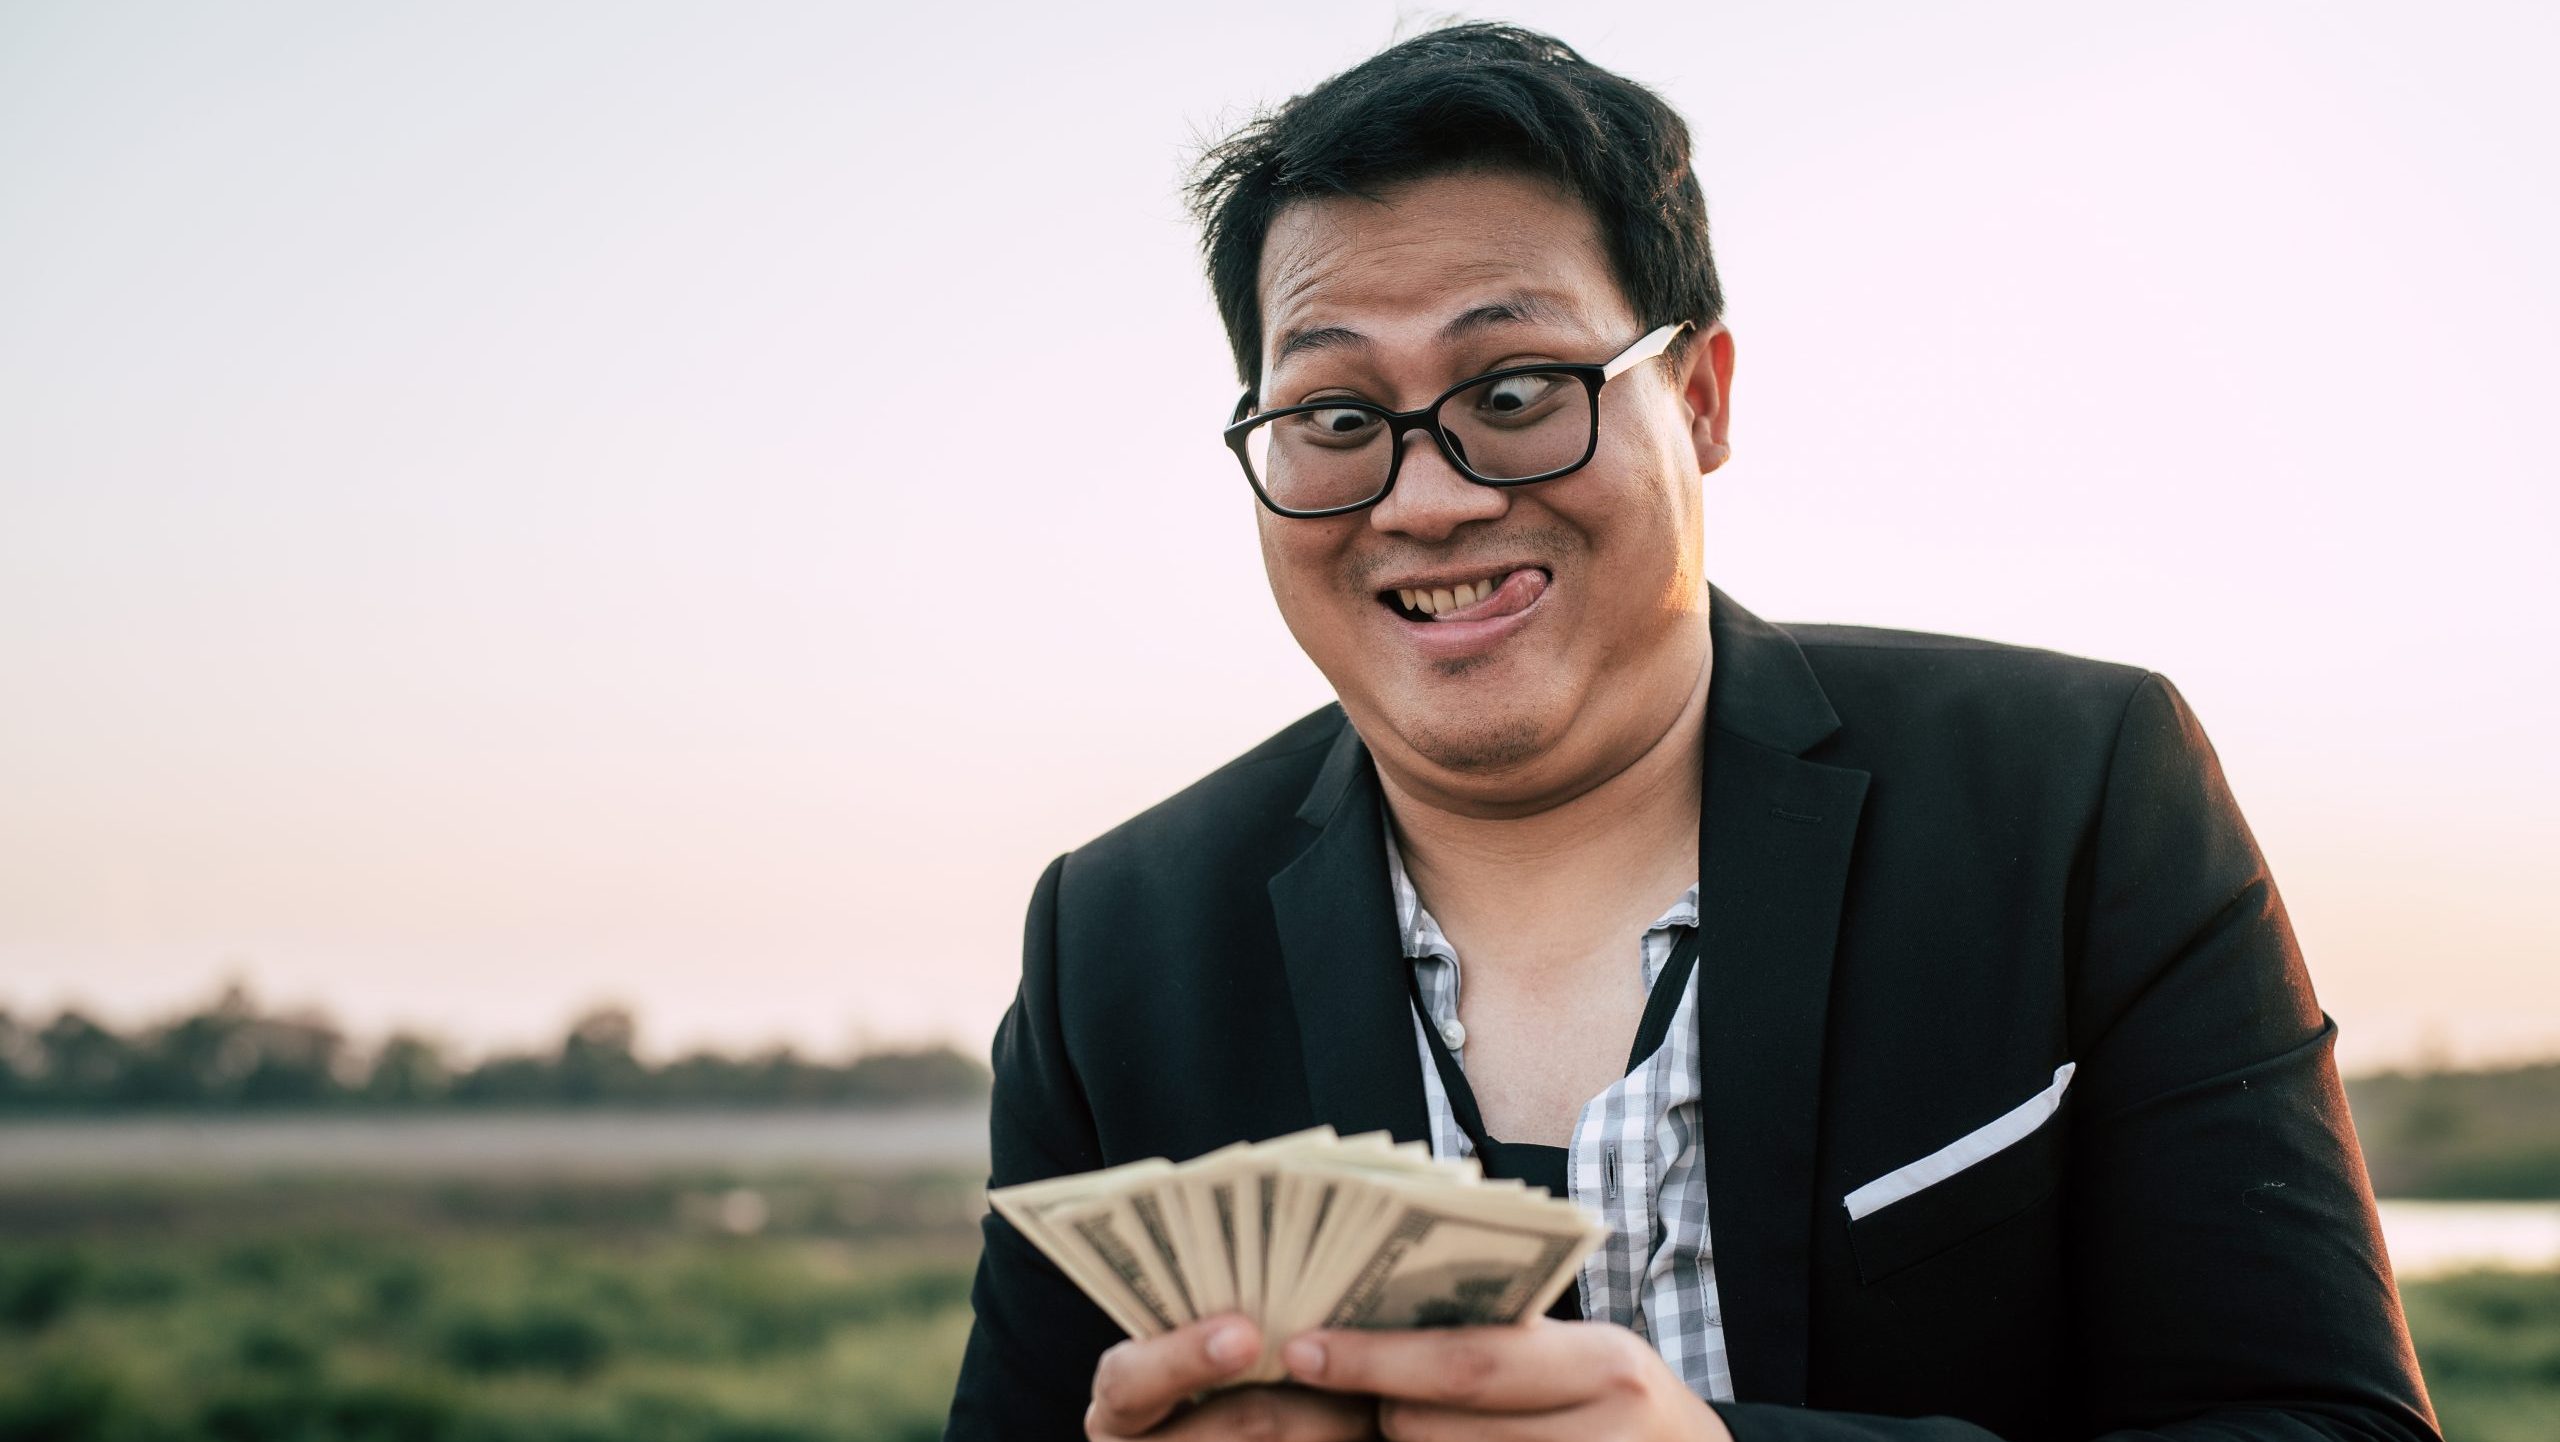 Man with silly facial expression holding a fan of money.